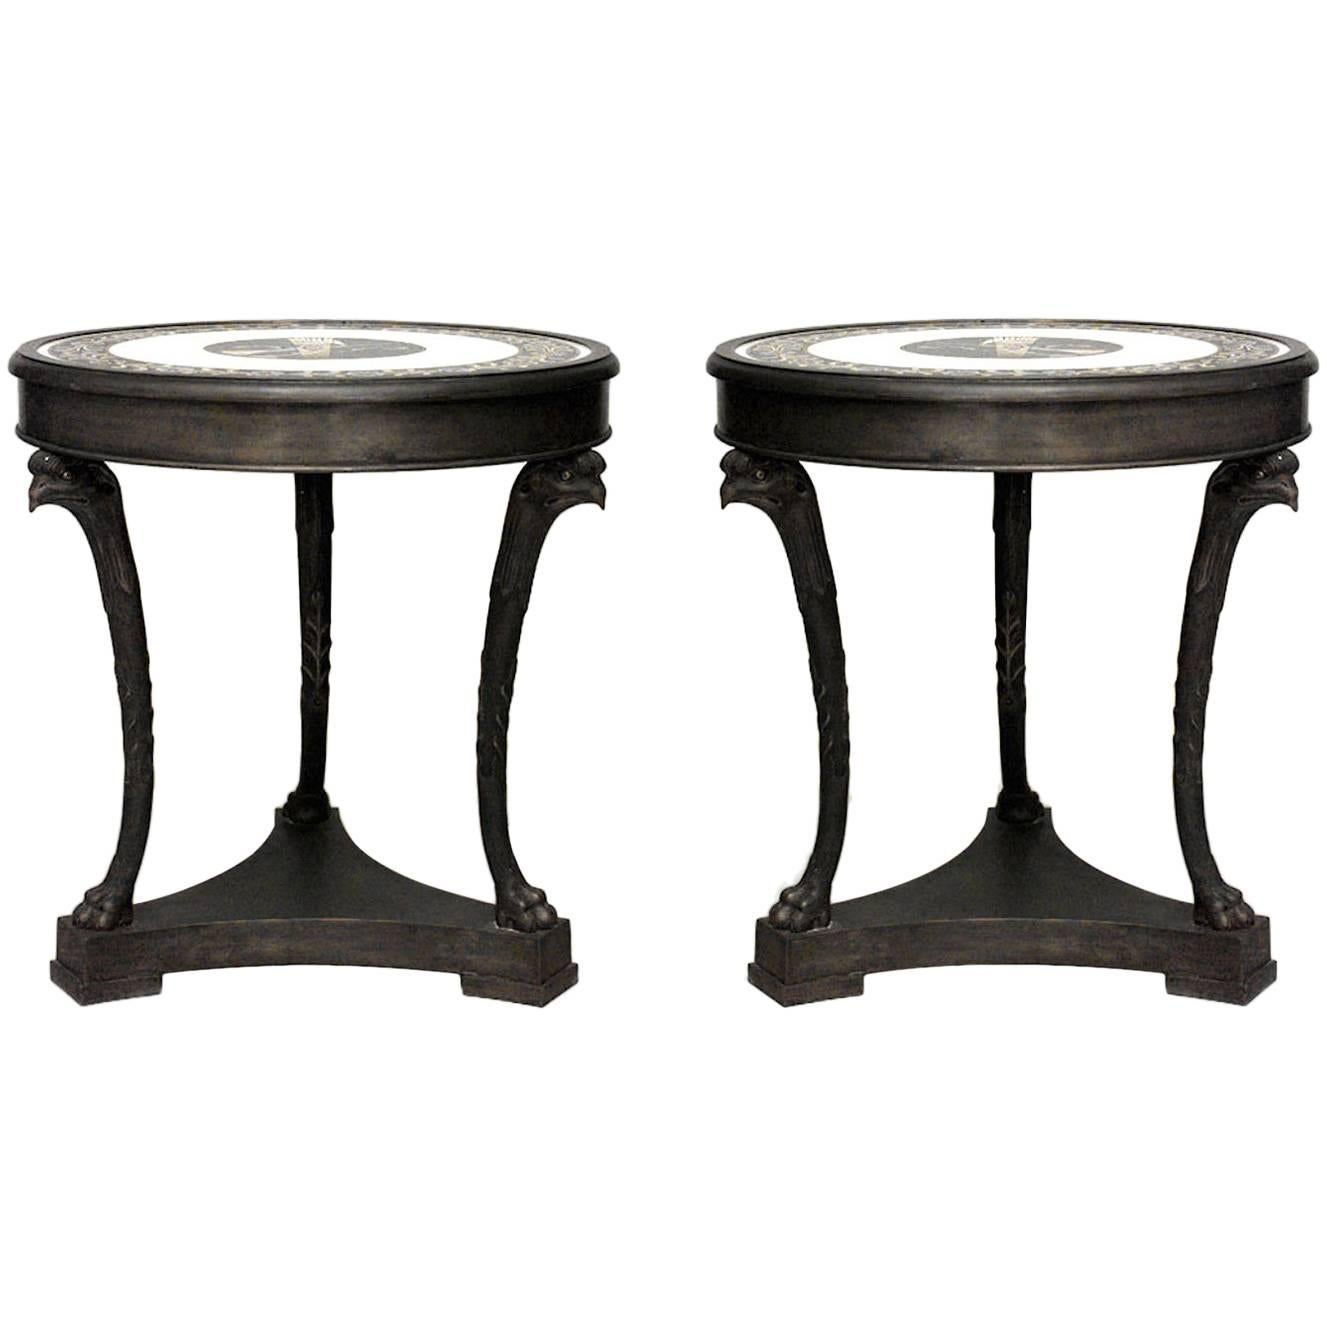 Pair of French Empire Style Round Bronze Gueridon Tables For Sale